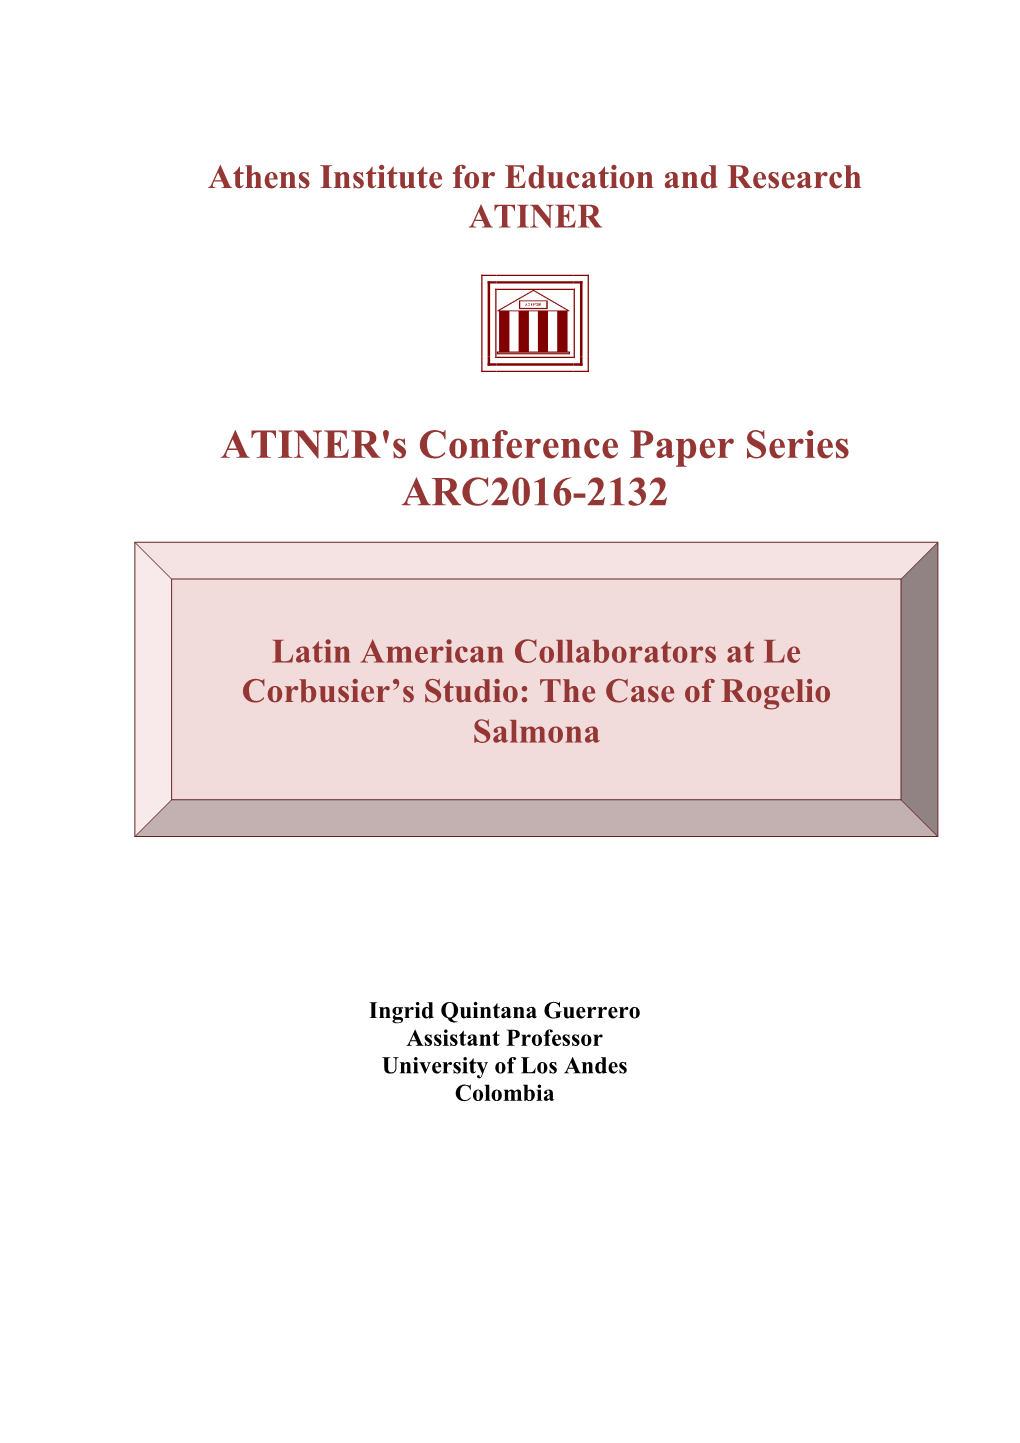 ATINER's Conference Paper Series ARC2016-2132